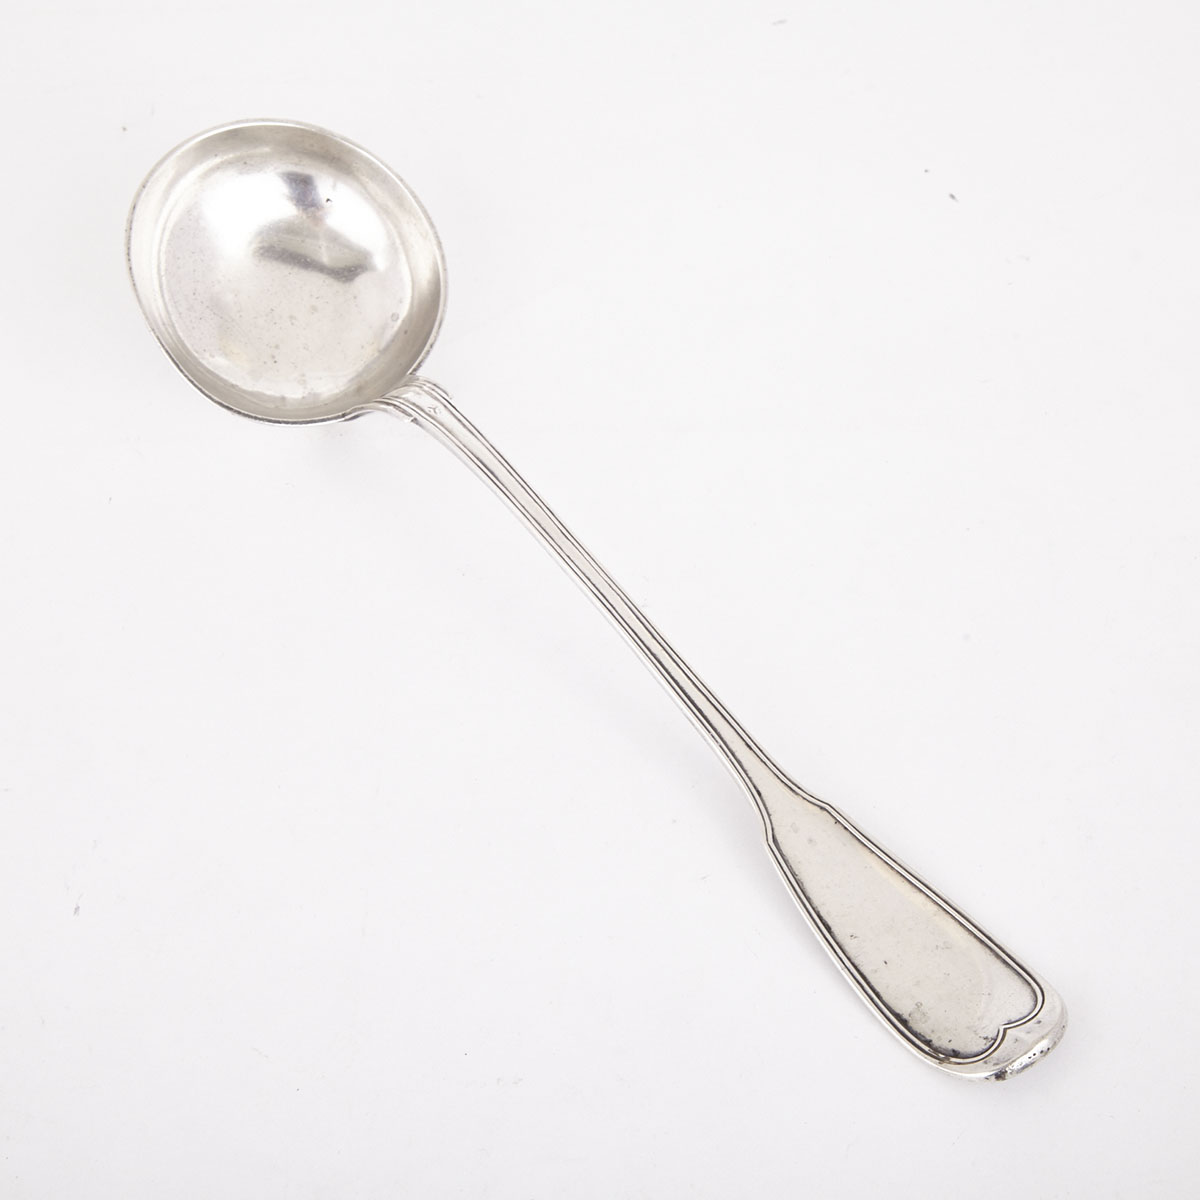 French Silver Fiddle and Thread Pattern Soup Ladle, Paris, mid-19th century